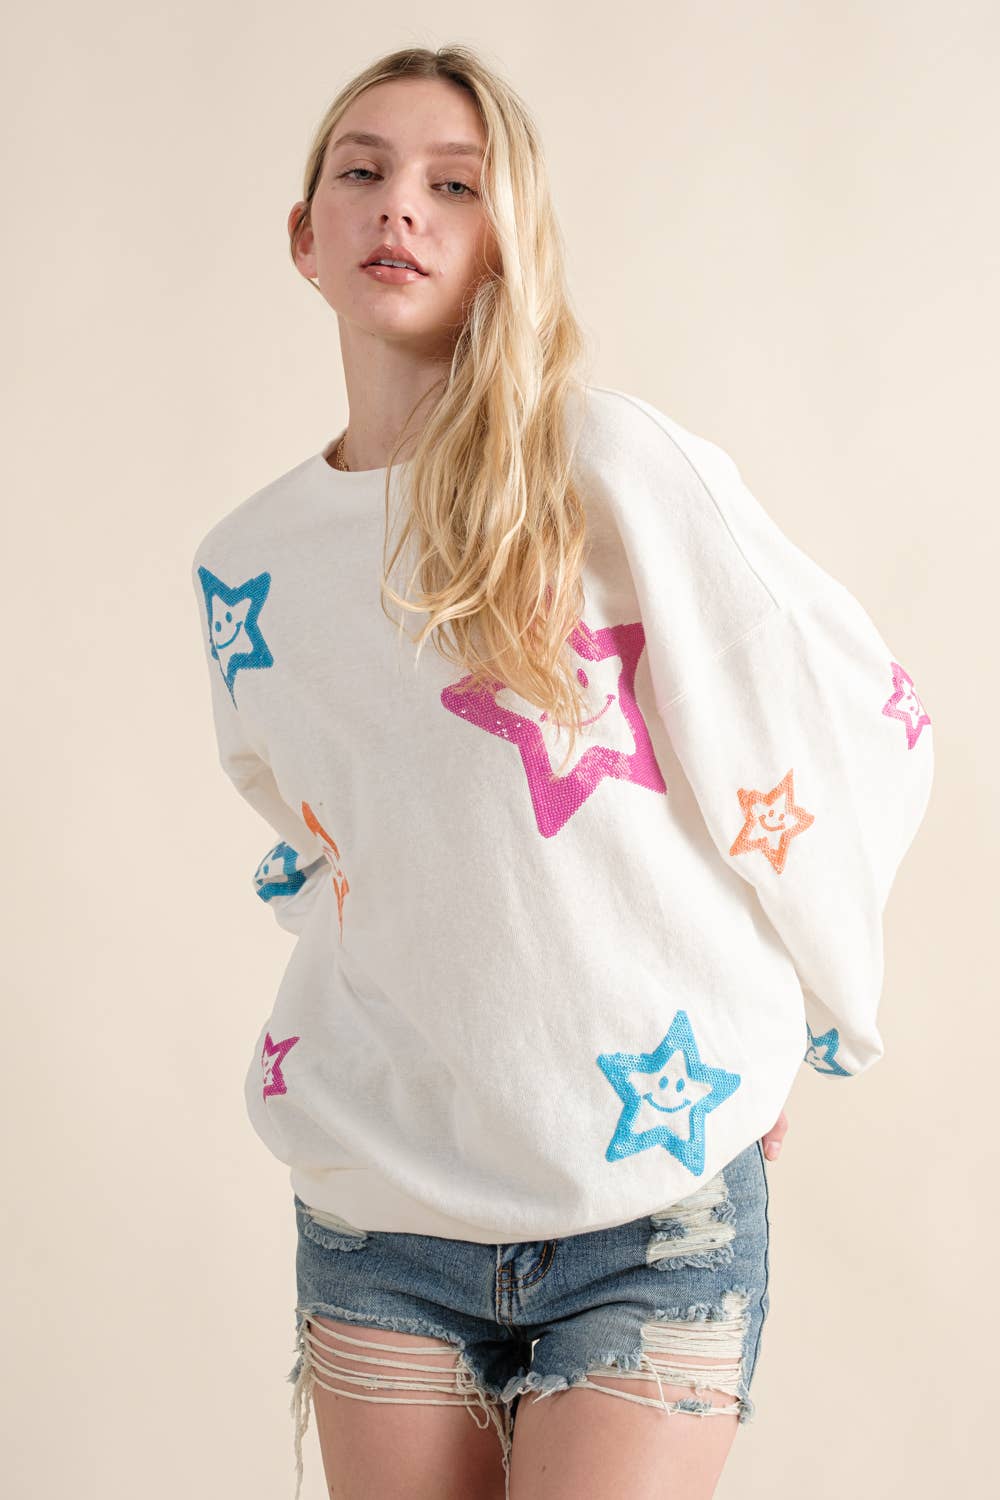 Blue B - 32960T - French Terry Star Sequin Smiley Sweatshirt: S / OFF WHITE